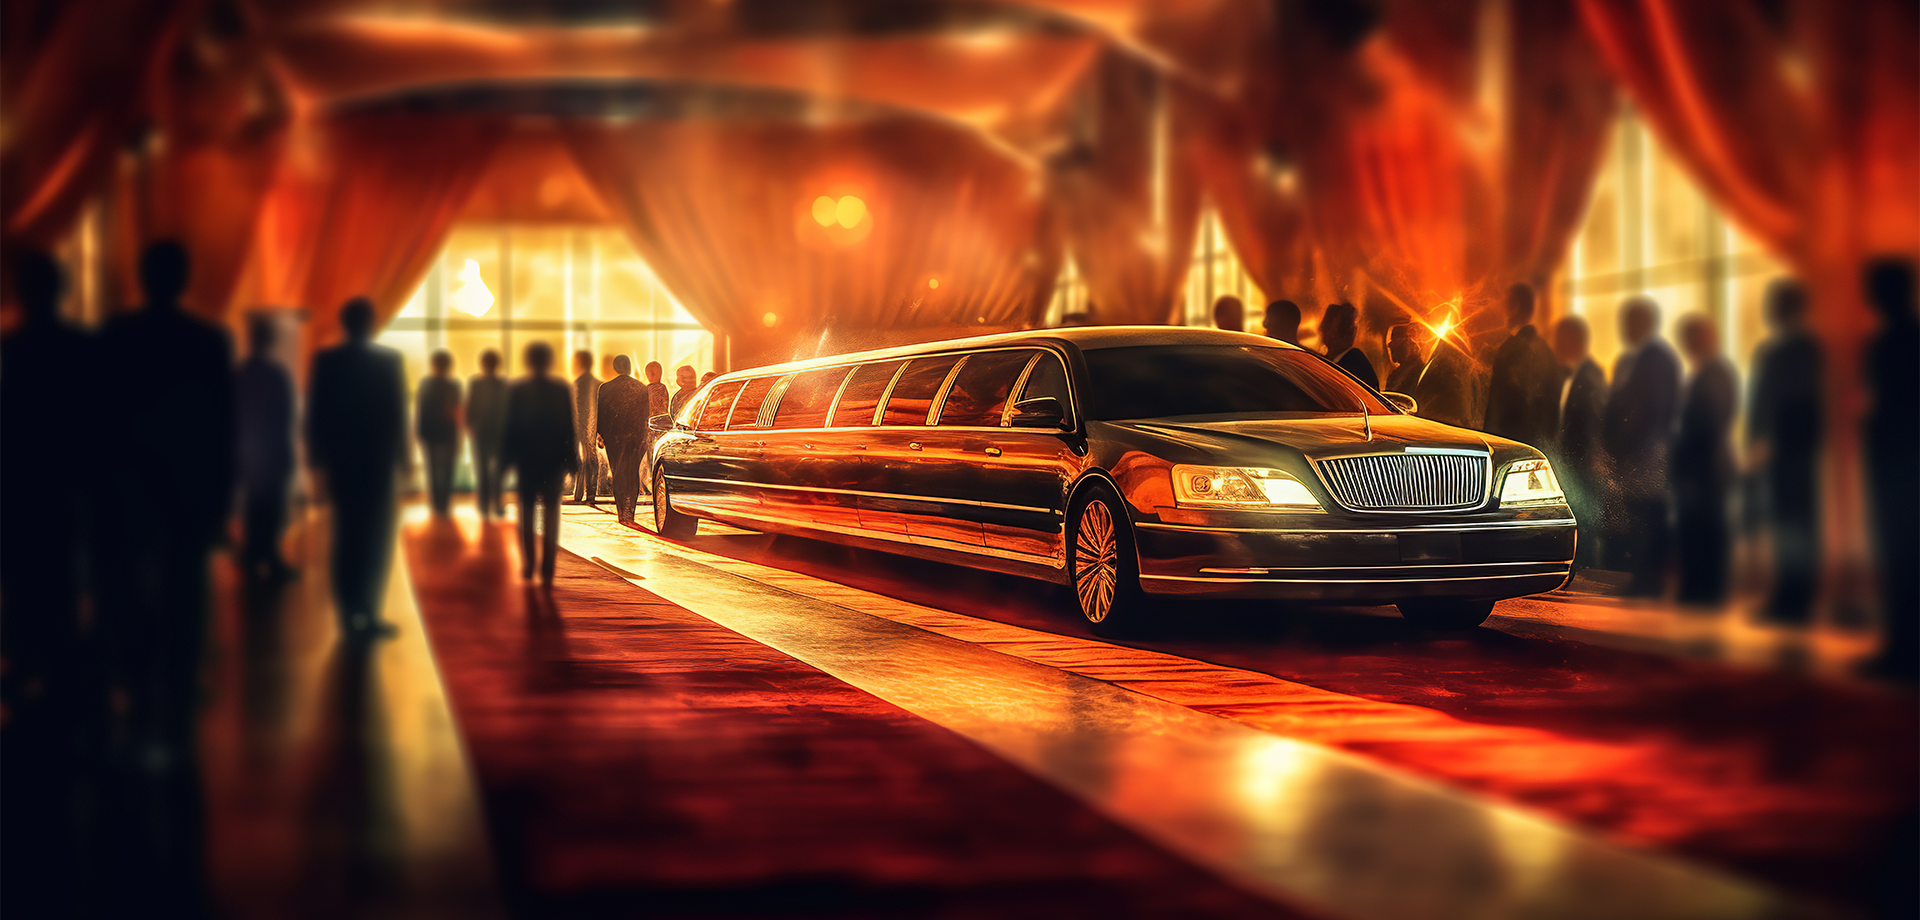 Limo Professional Chauffeurs Tourist Limo , Book Online Limo , Limo Services , Luxurious Vehicles , Professional Chauffeurs Limo